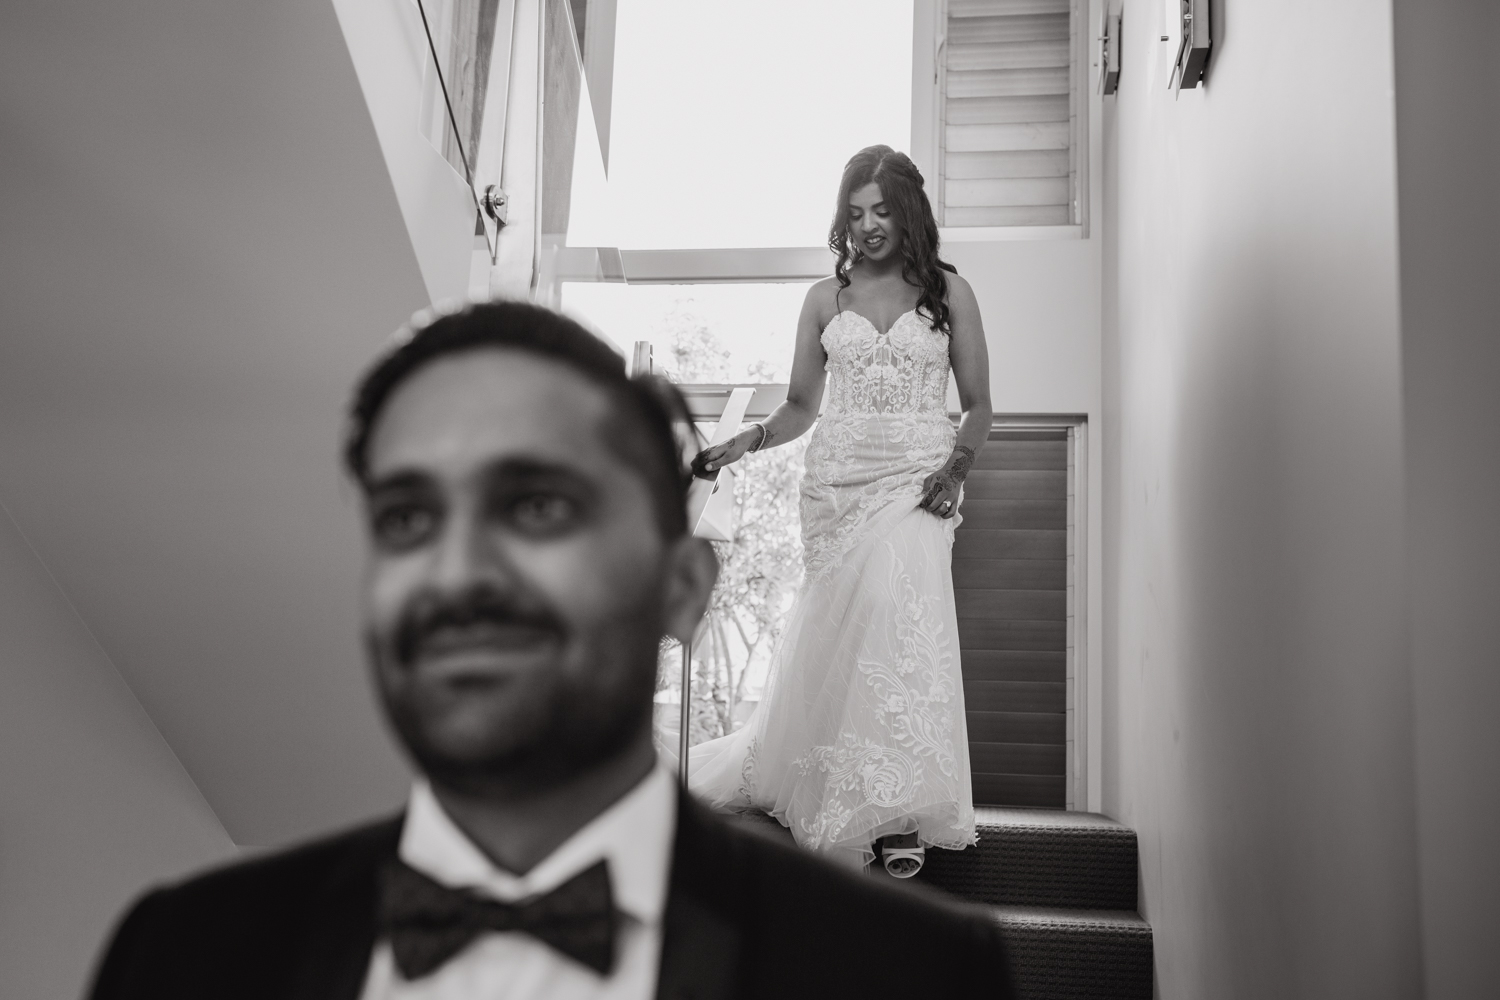 First look. This image was taken by Mala Photography, an Auckland based wedding photographer. The wedding was at Markovina Vineyard Estate In Kumeu, Auckland